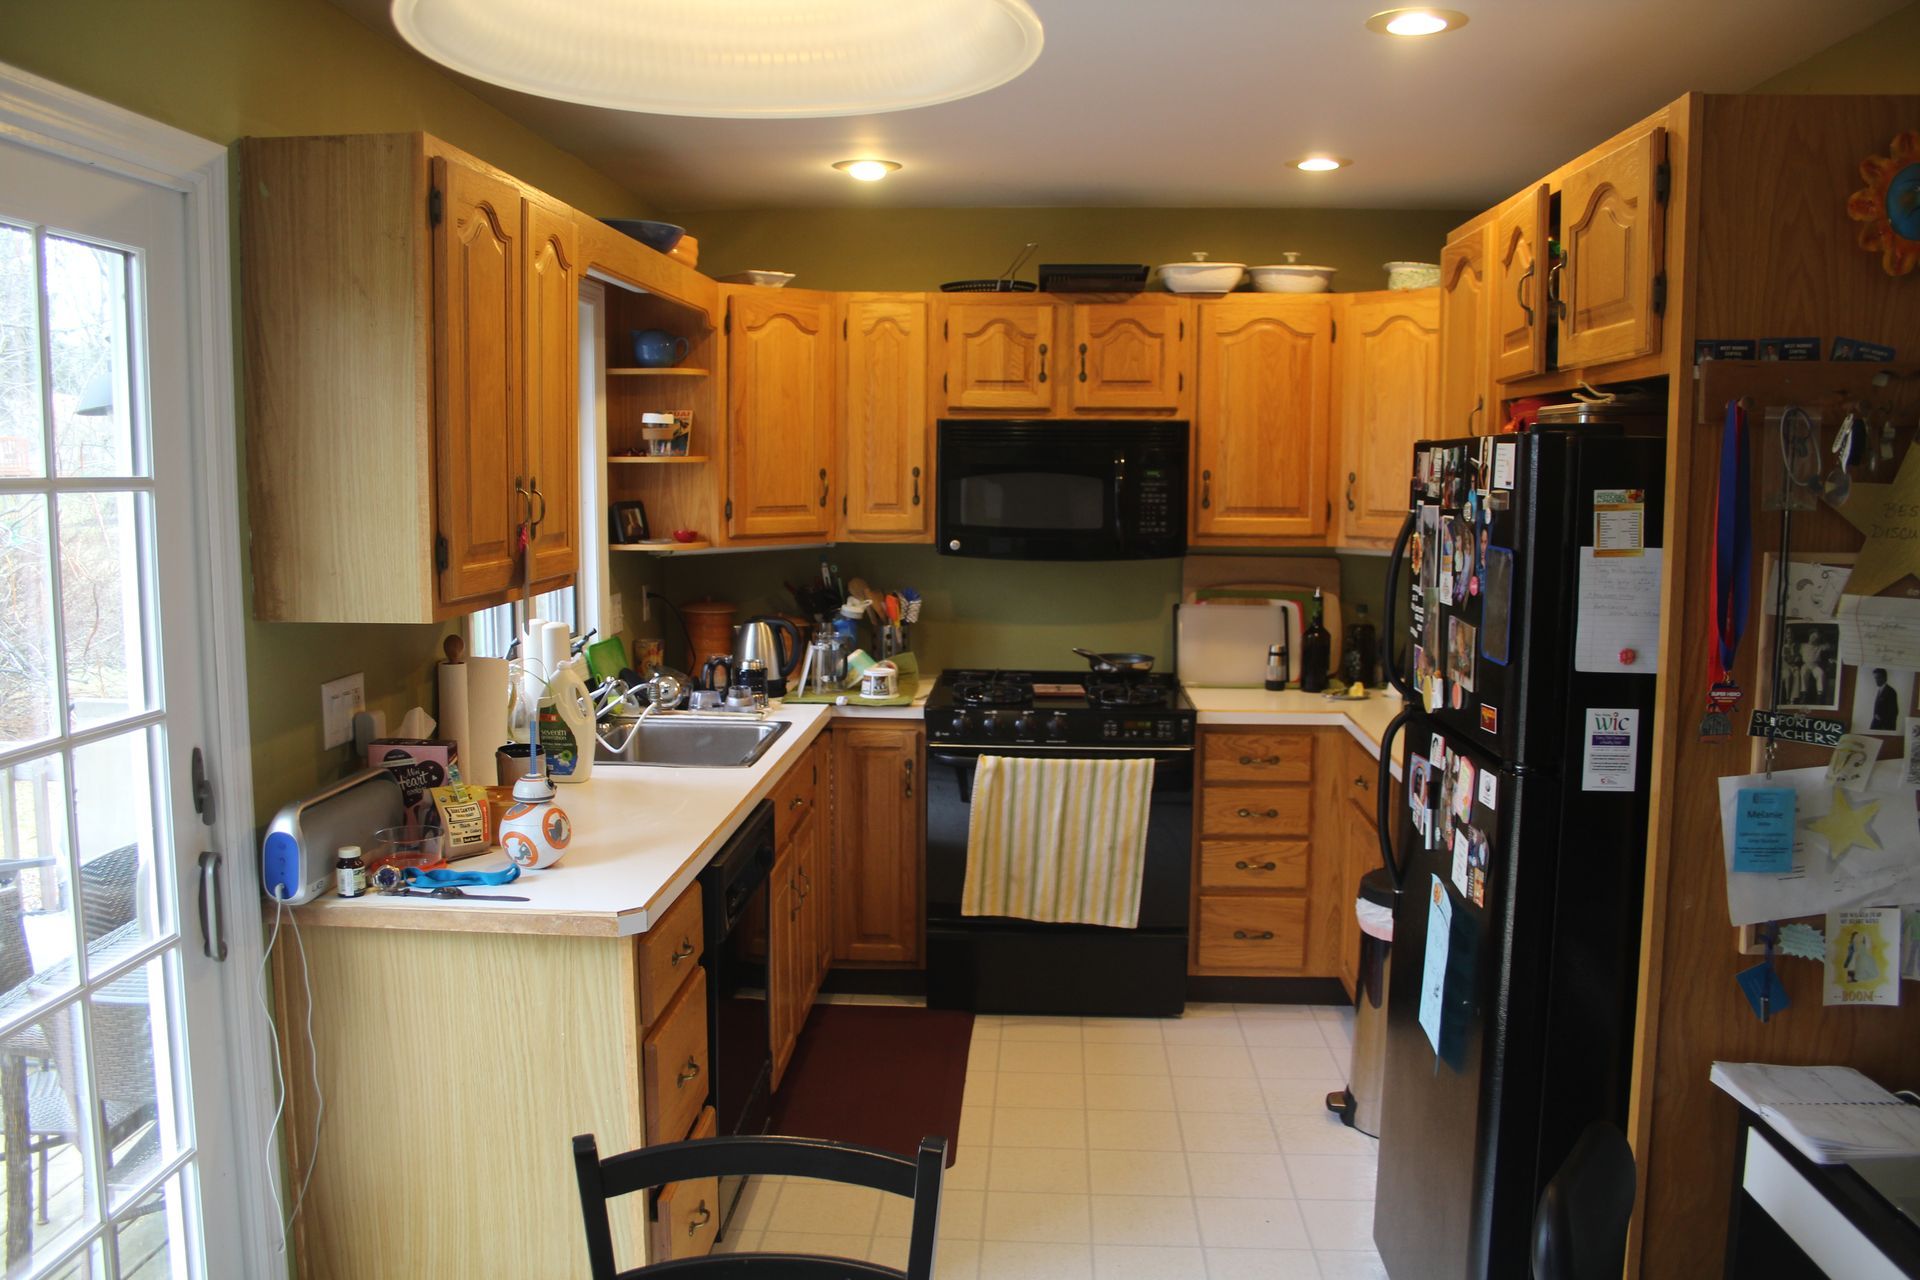 A kitchen with wooden cabinets and a black refrigerator